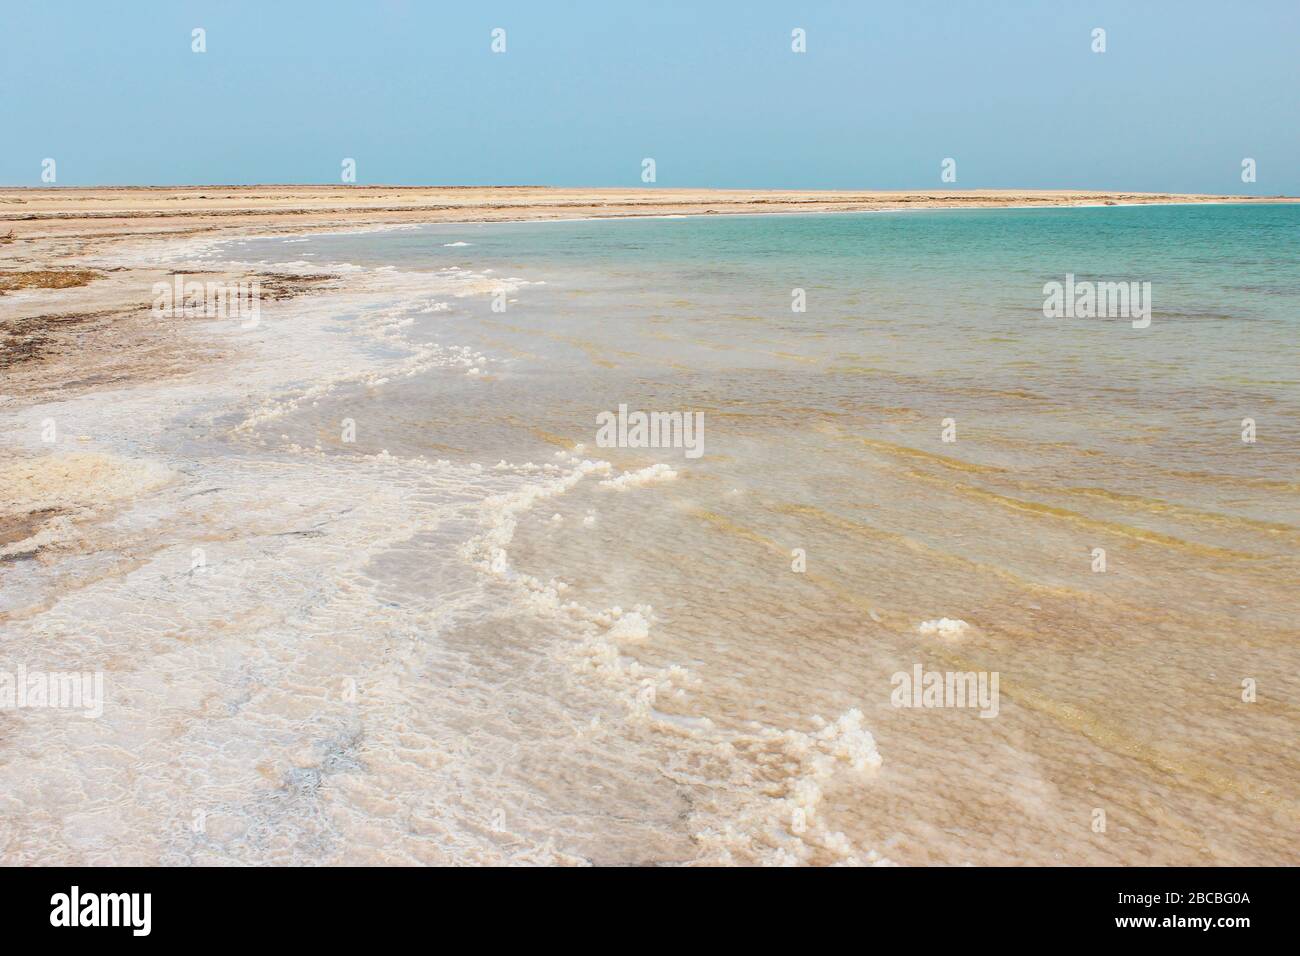 Landscape overlooking the shore of the Dead Sea Stock Photo